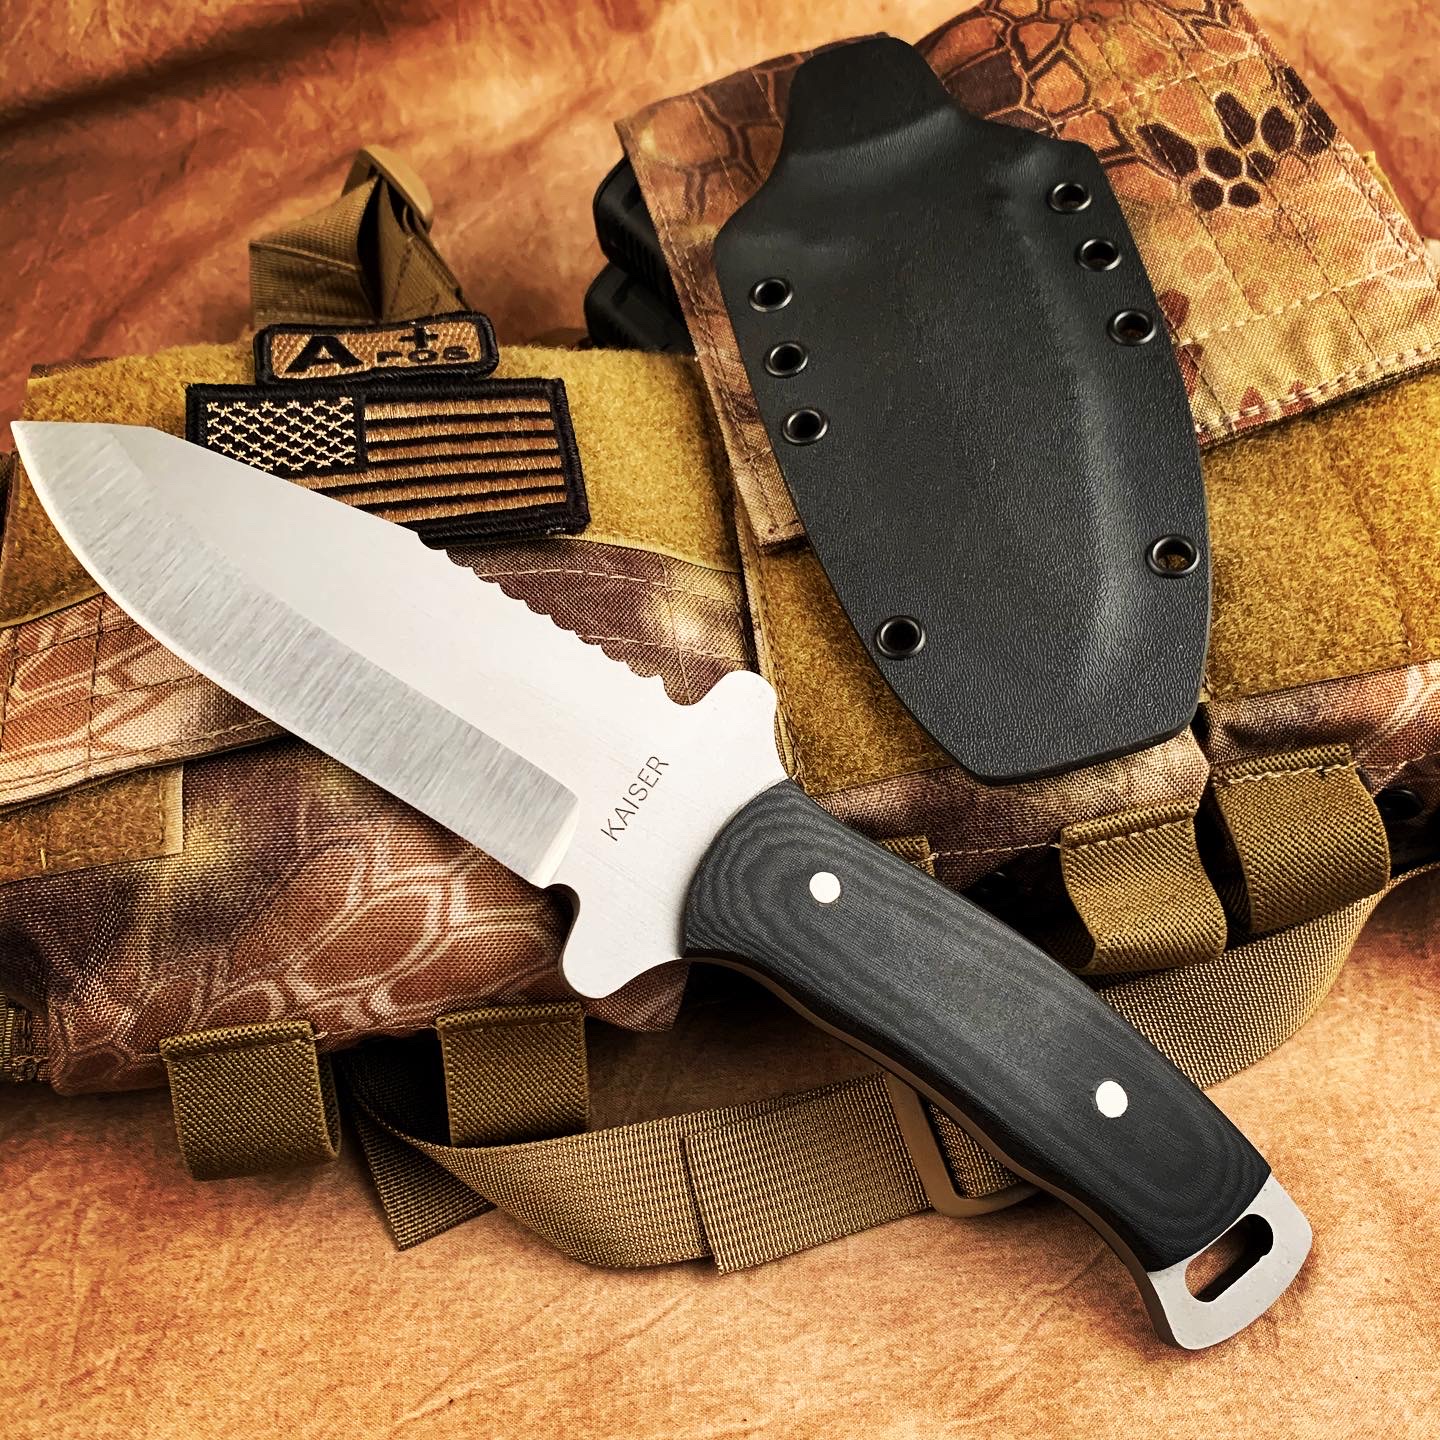 T.U.R.K. (Tactical Unit Rescue Knife) NEW FOR 2020! - 3 RIVER BLADES